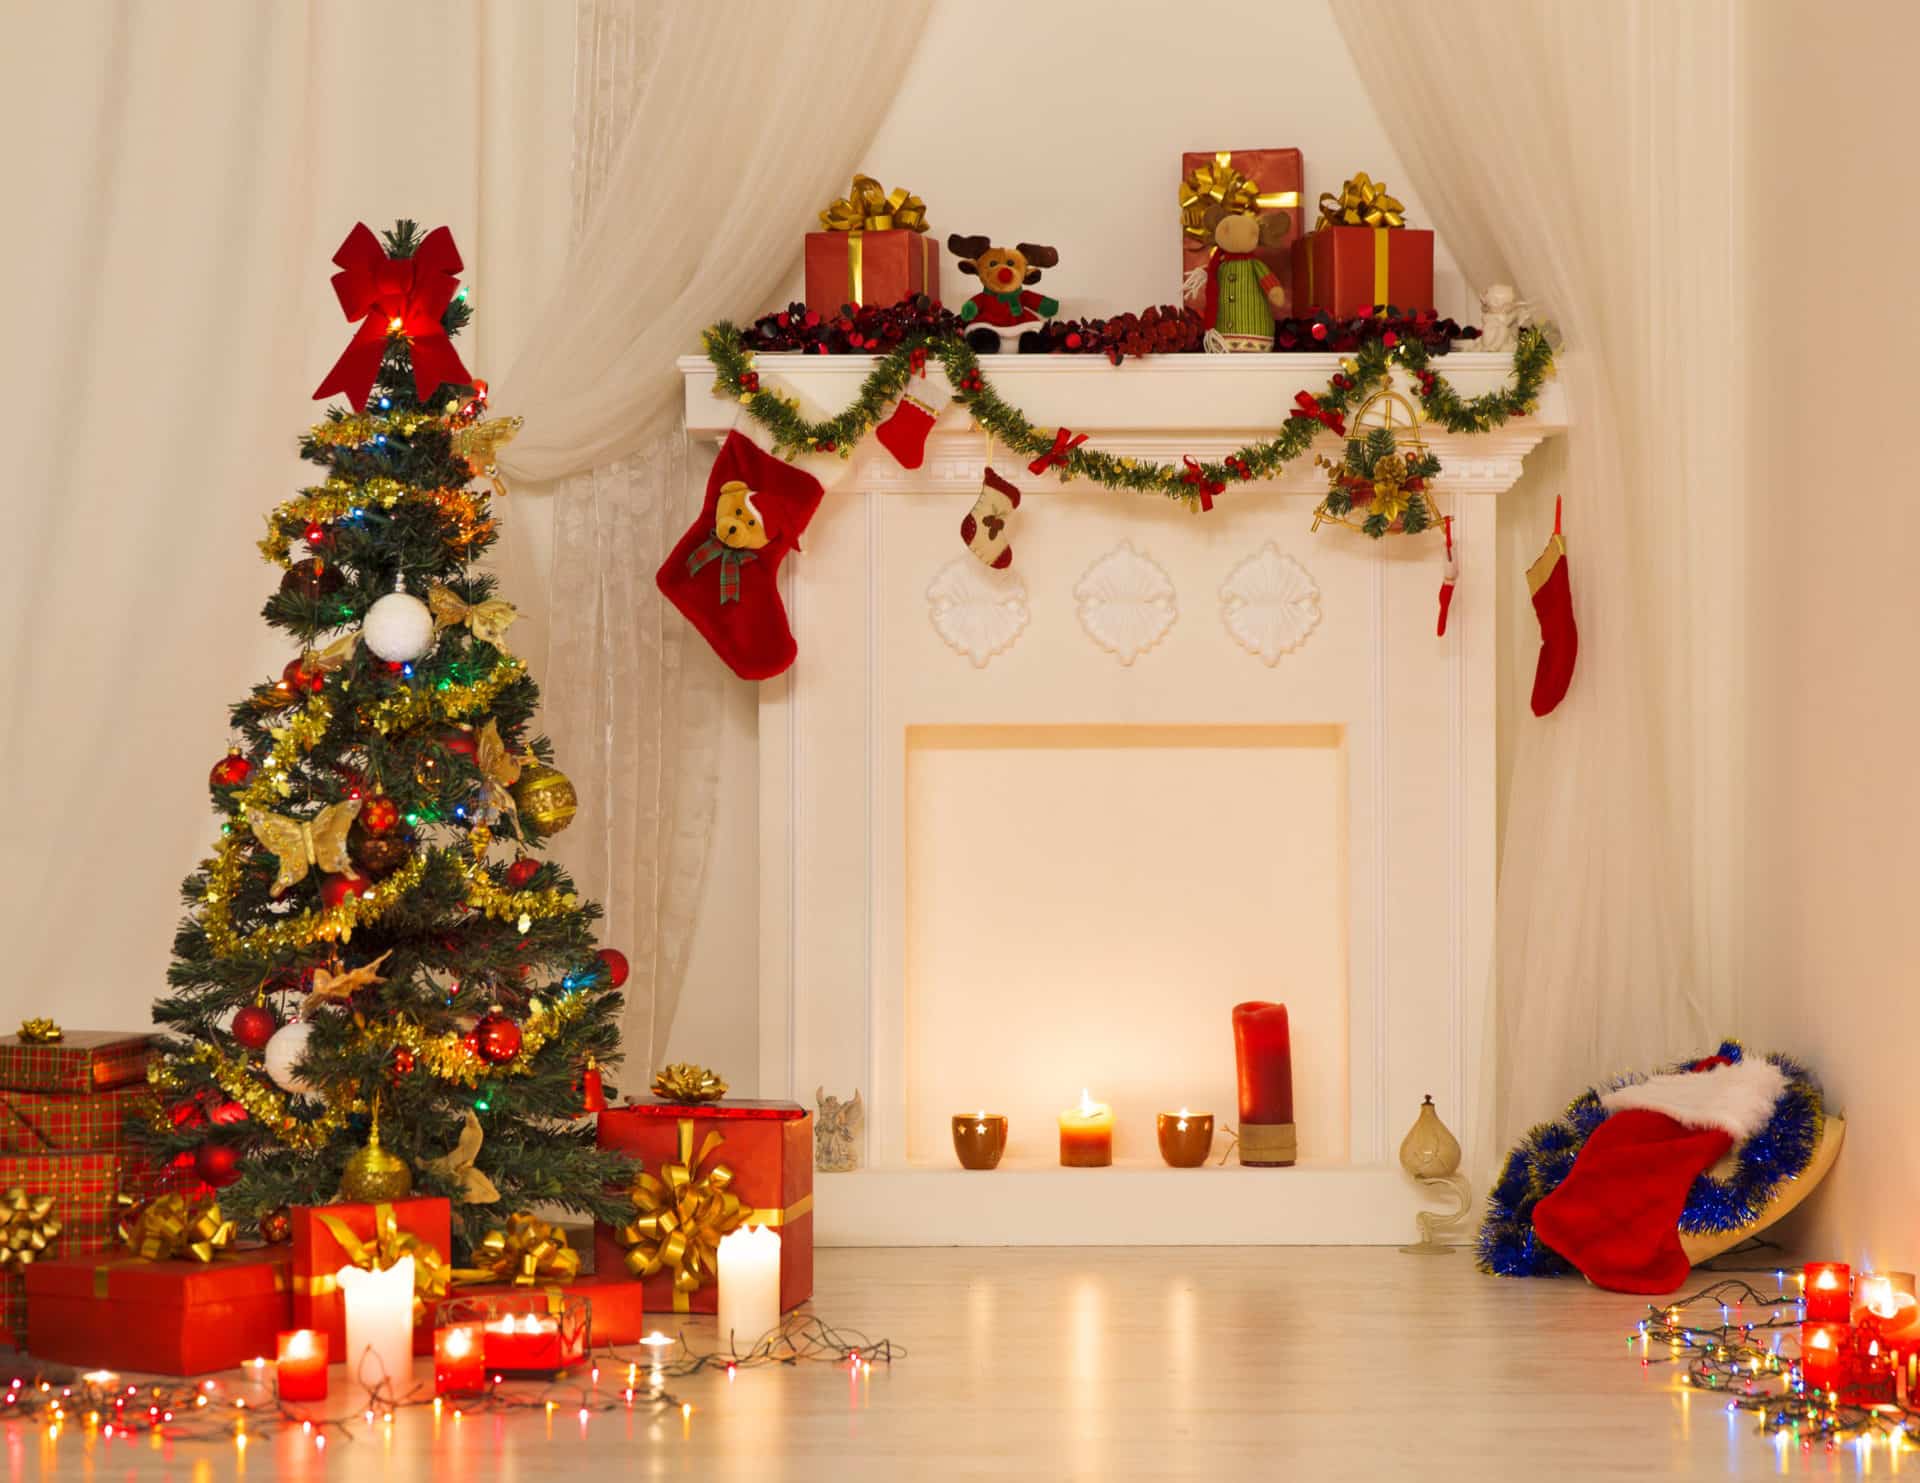 Decorating for the Holidays in New York? How to Avoid Injury